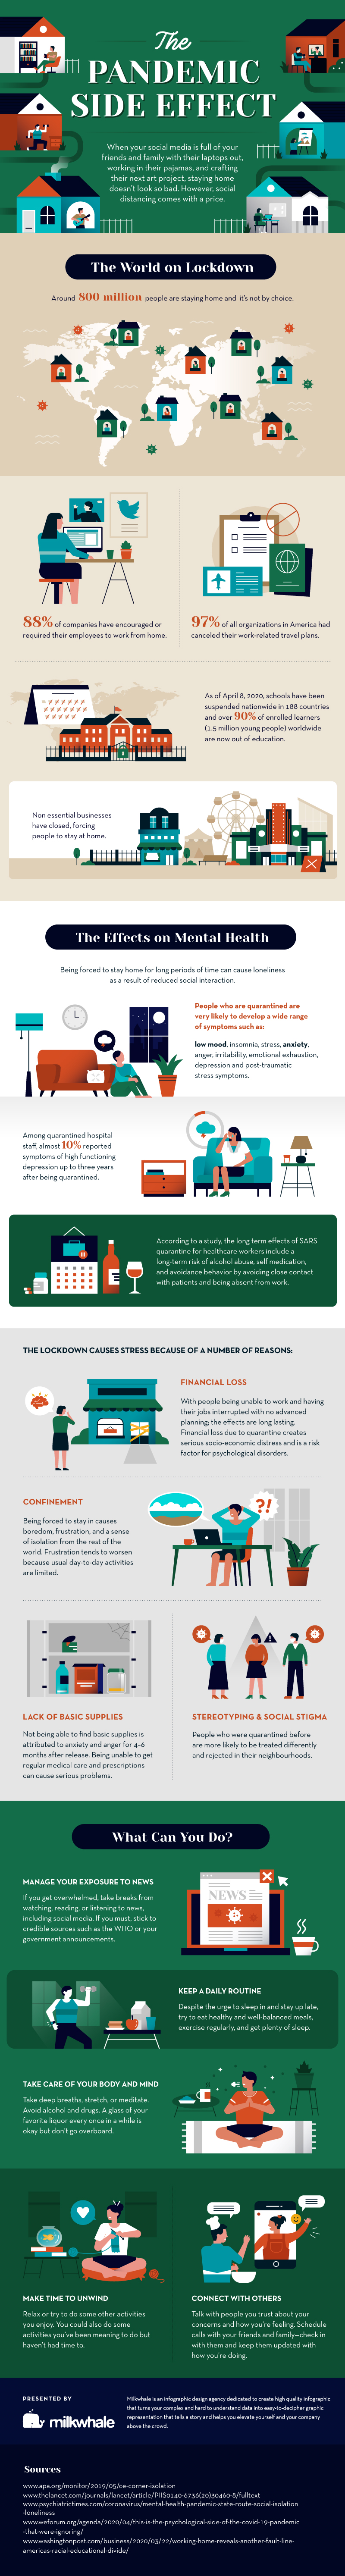 Infographic for The Pandemic Side Effect: Post-Pandemic Stress